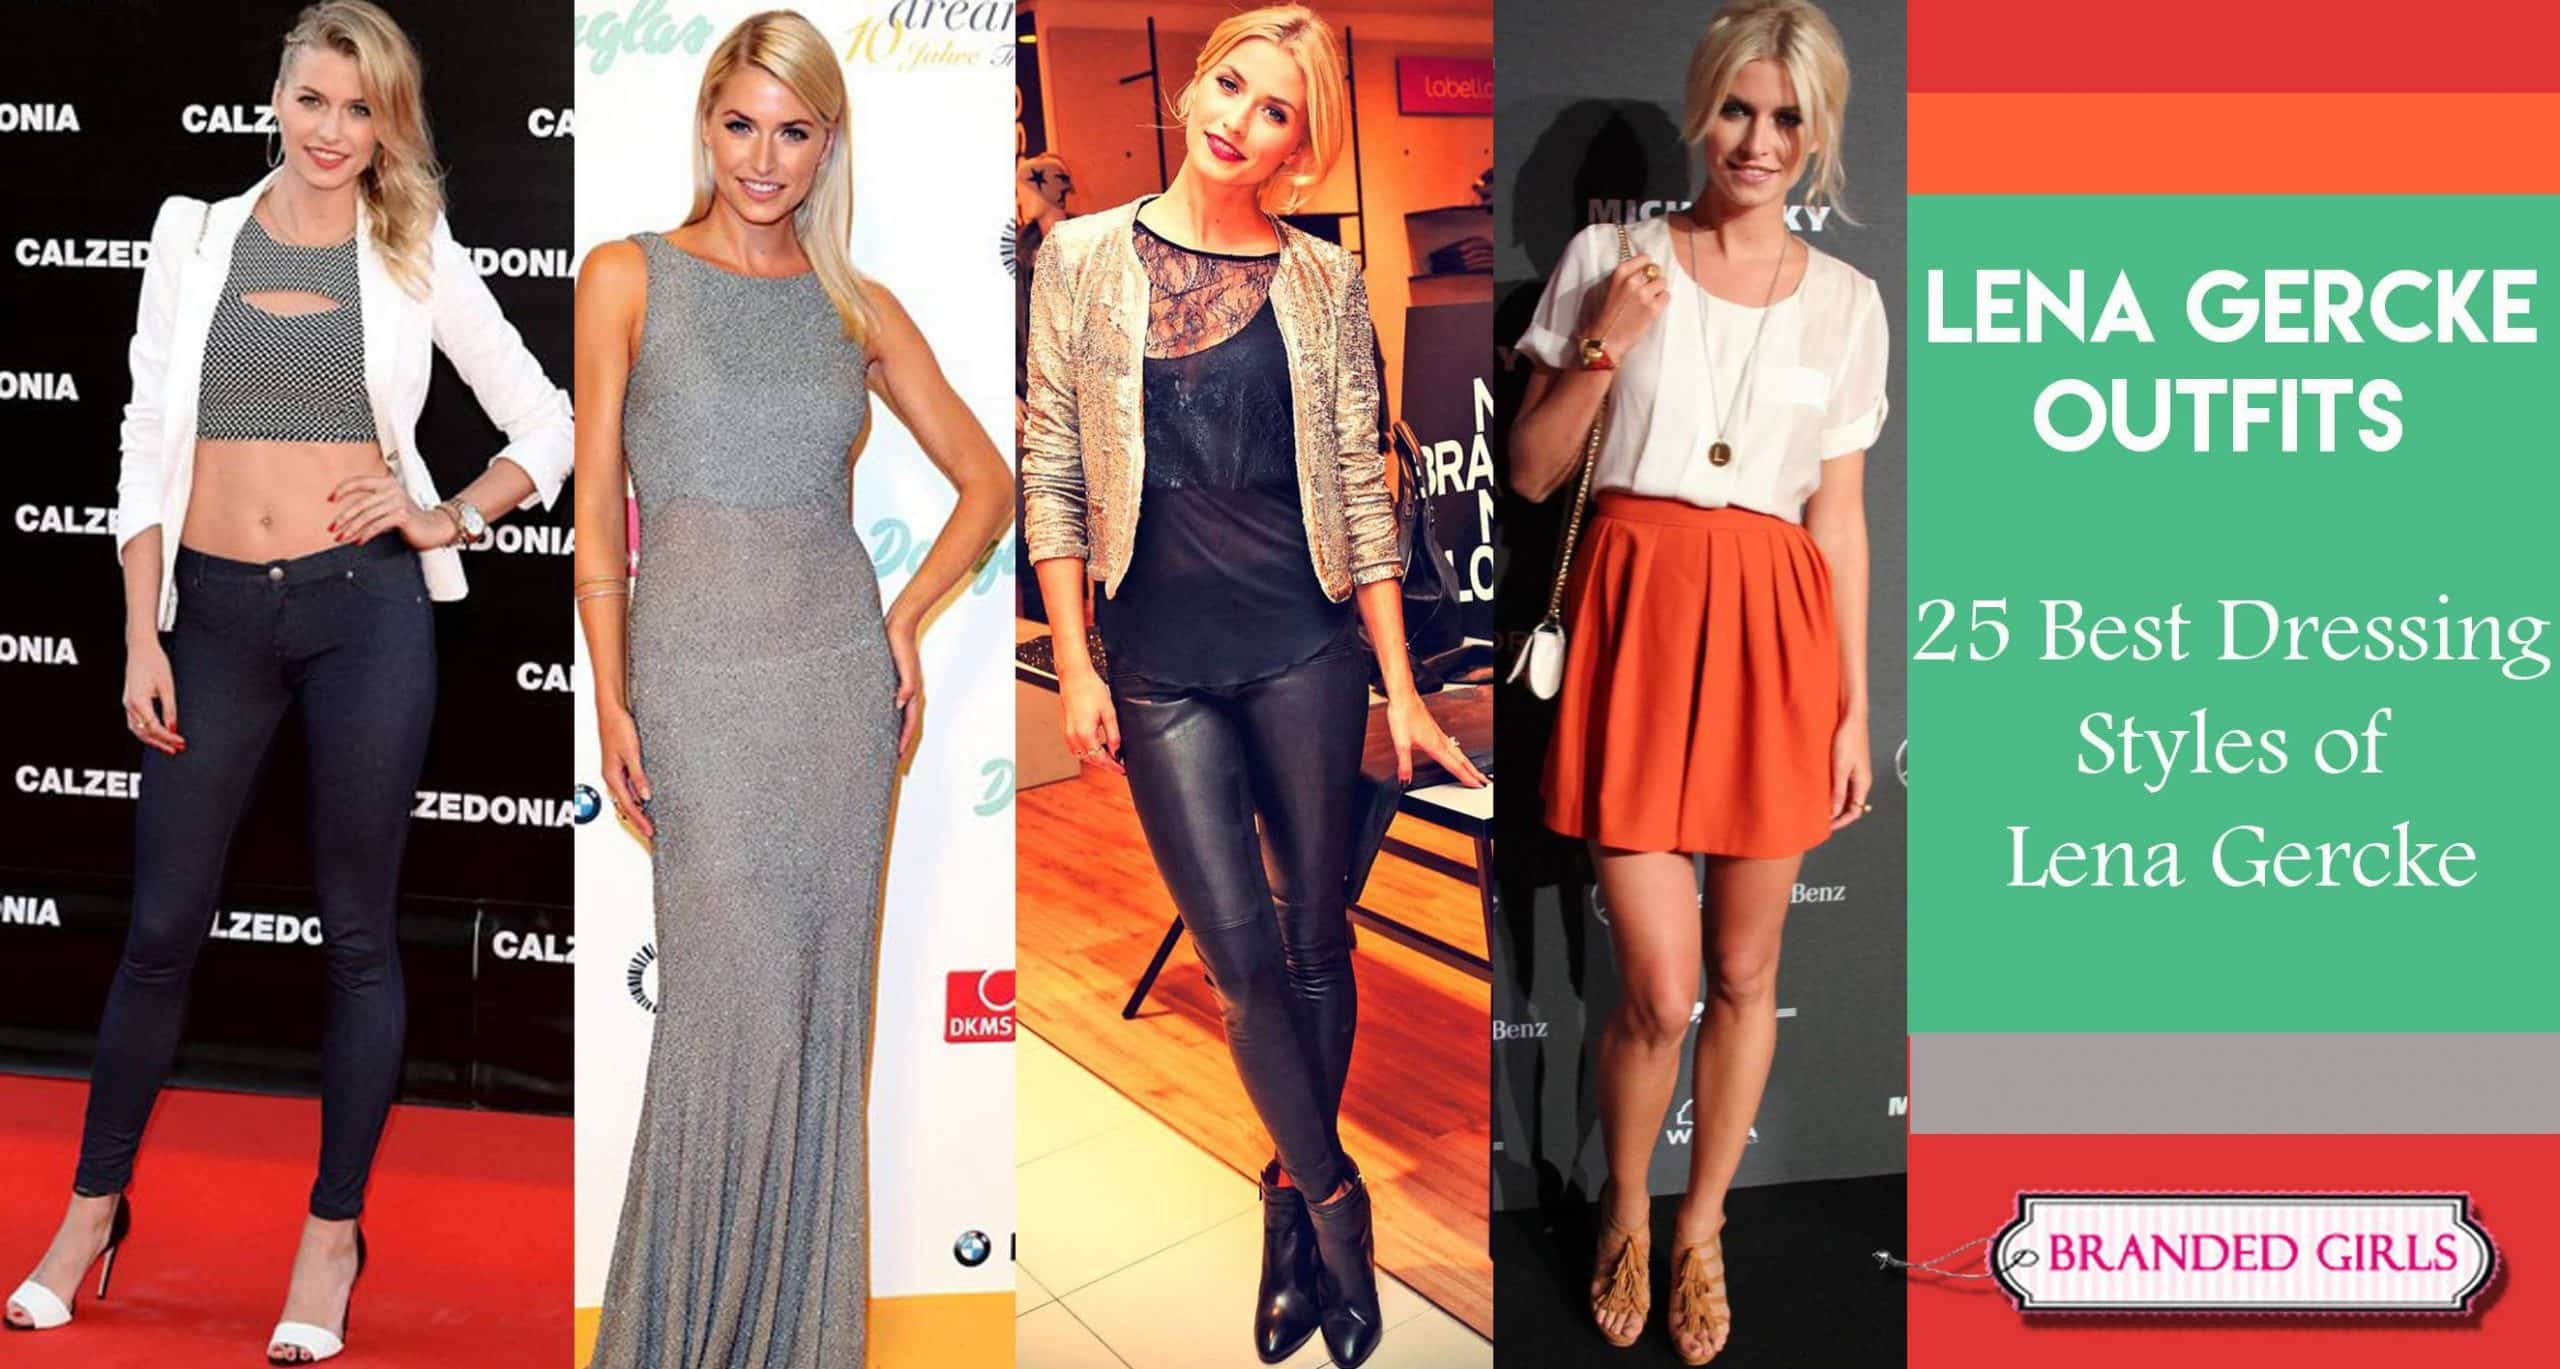 Lena Gercke Outfits 25 Best Dressing Style of Lena Gercke to Copy